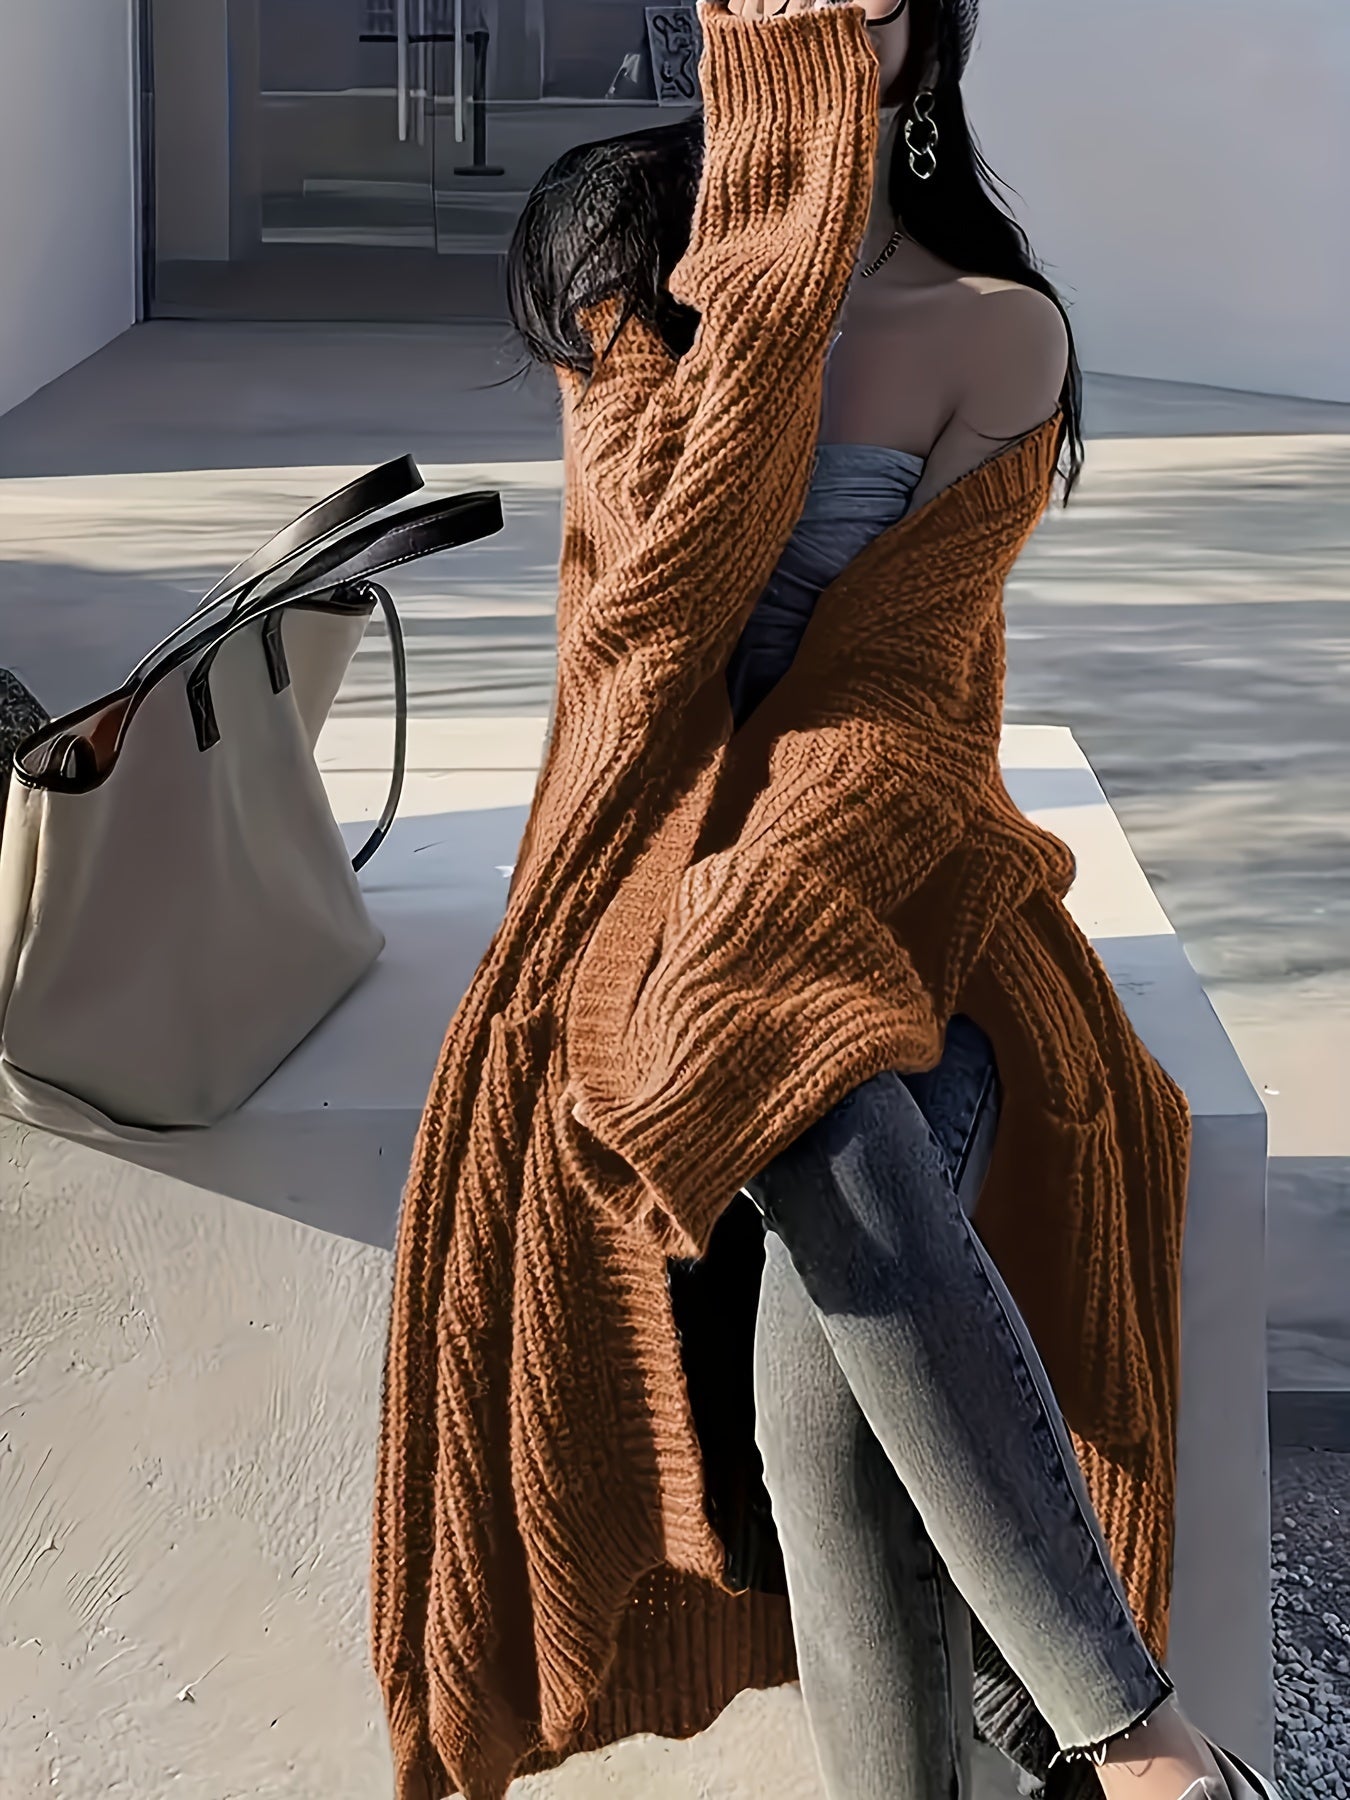 A person in a Plus Size Open Front Loose Knit Cardigan, Casual Long Sleeve Long Length Cardigan With Pocket, Women's Plus Size Clothing by Maramalive™, sits on a concrete surface next to a beige handbag.